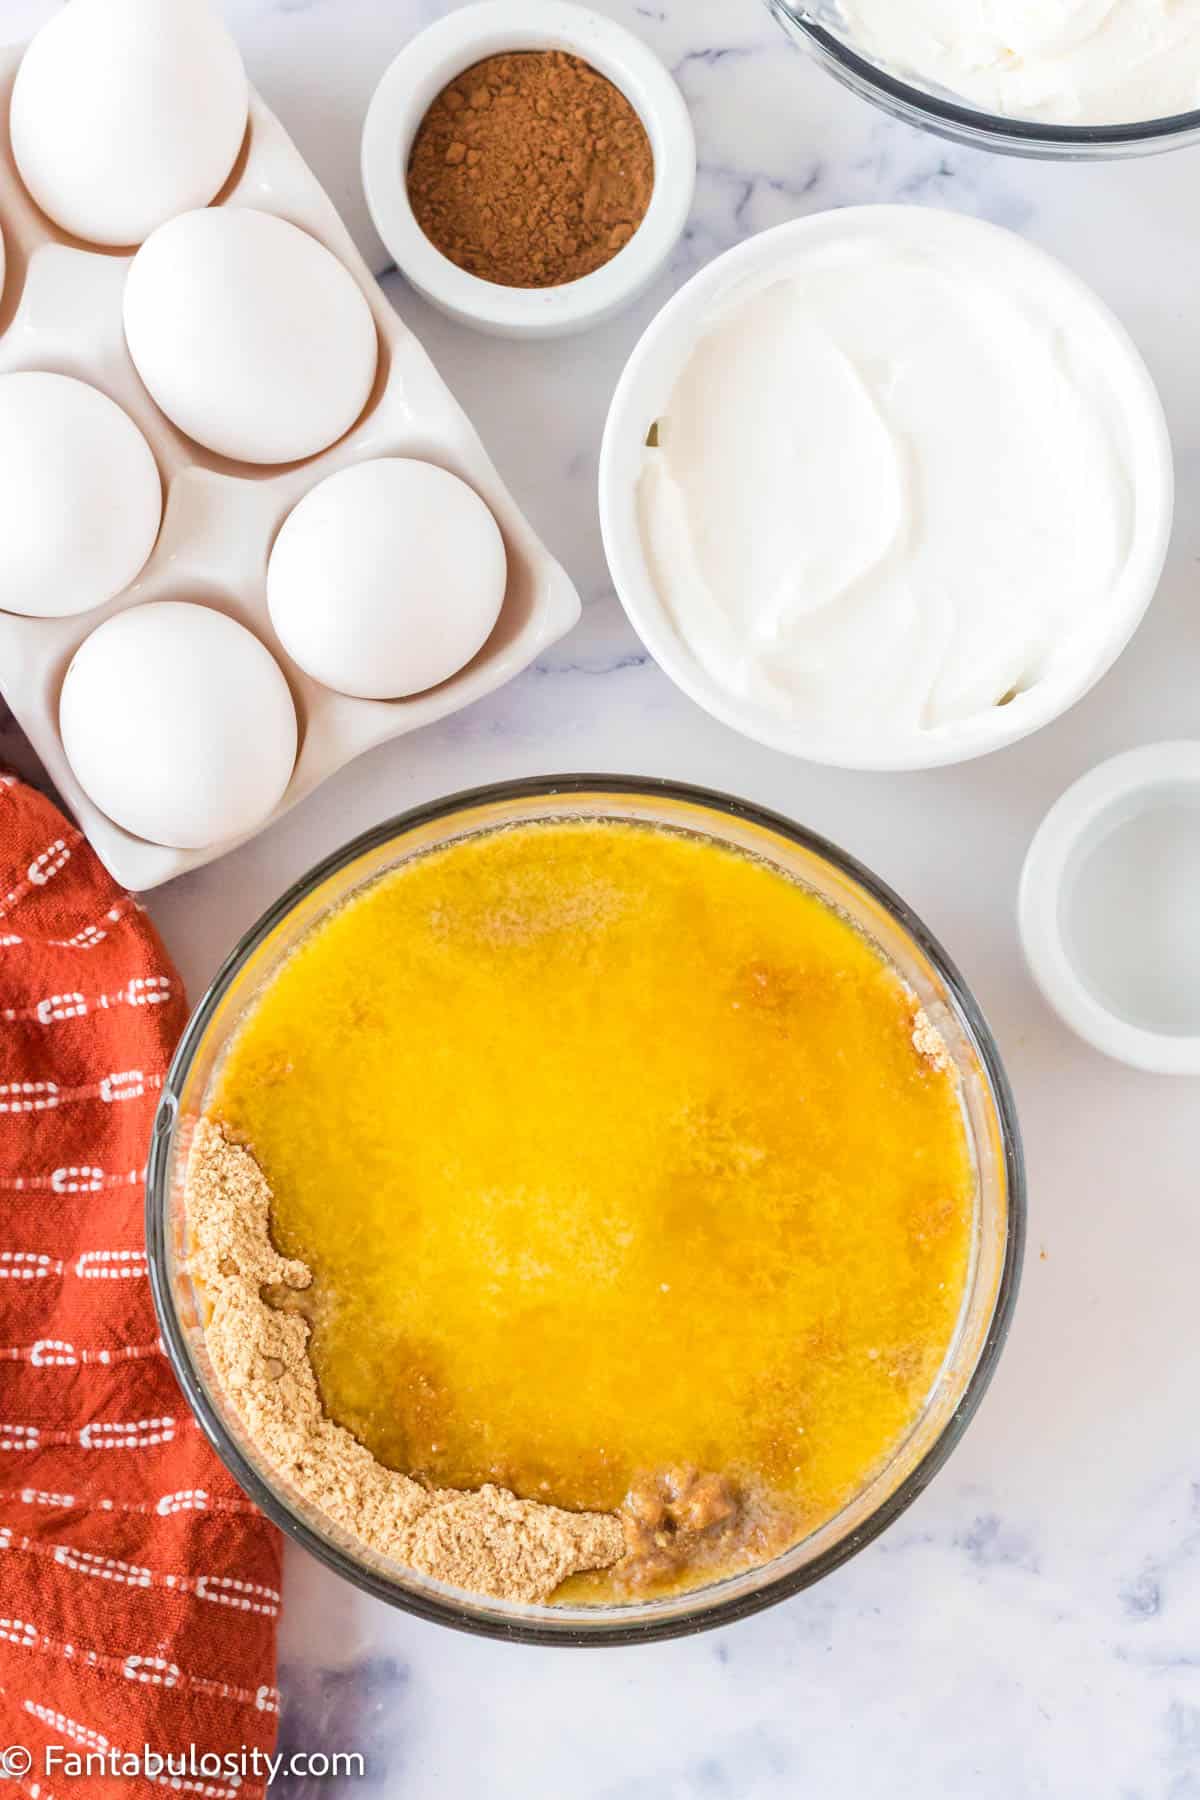 Surrounded by other baking ingredients, a large glass mixing bowl holds graham cracker crumbs and melted butter